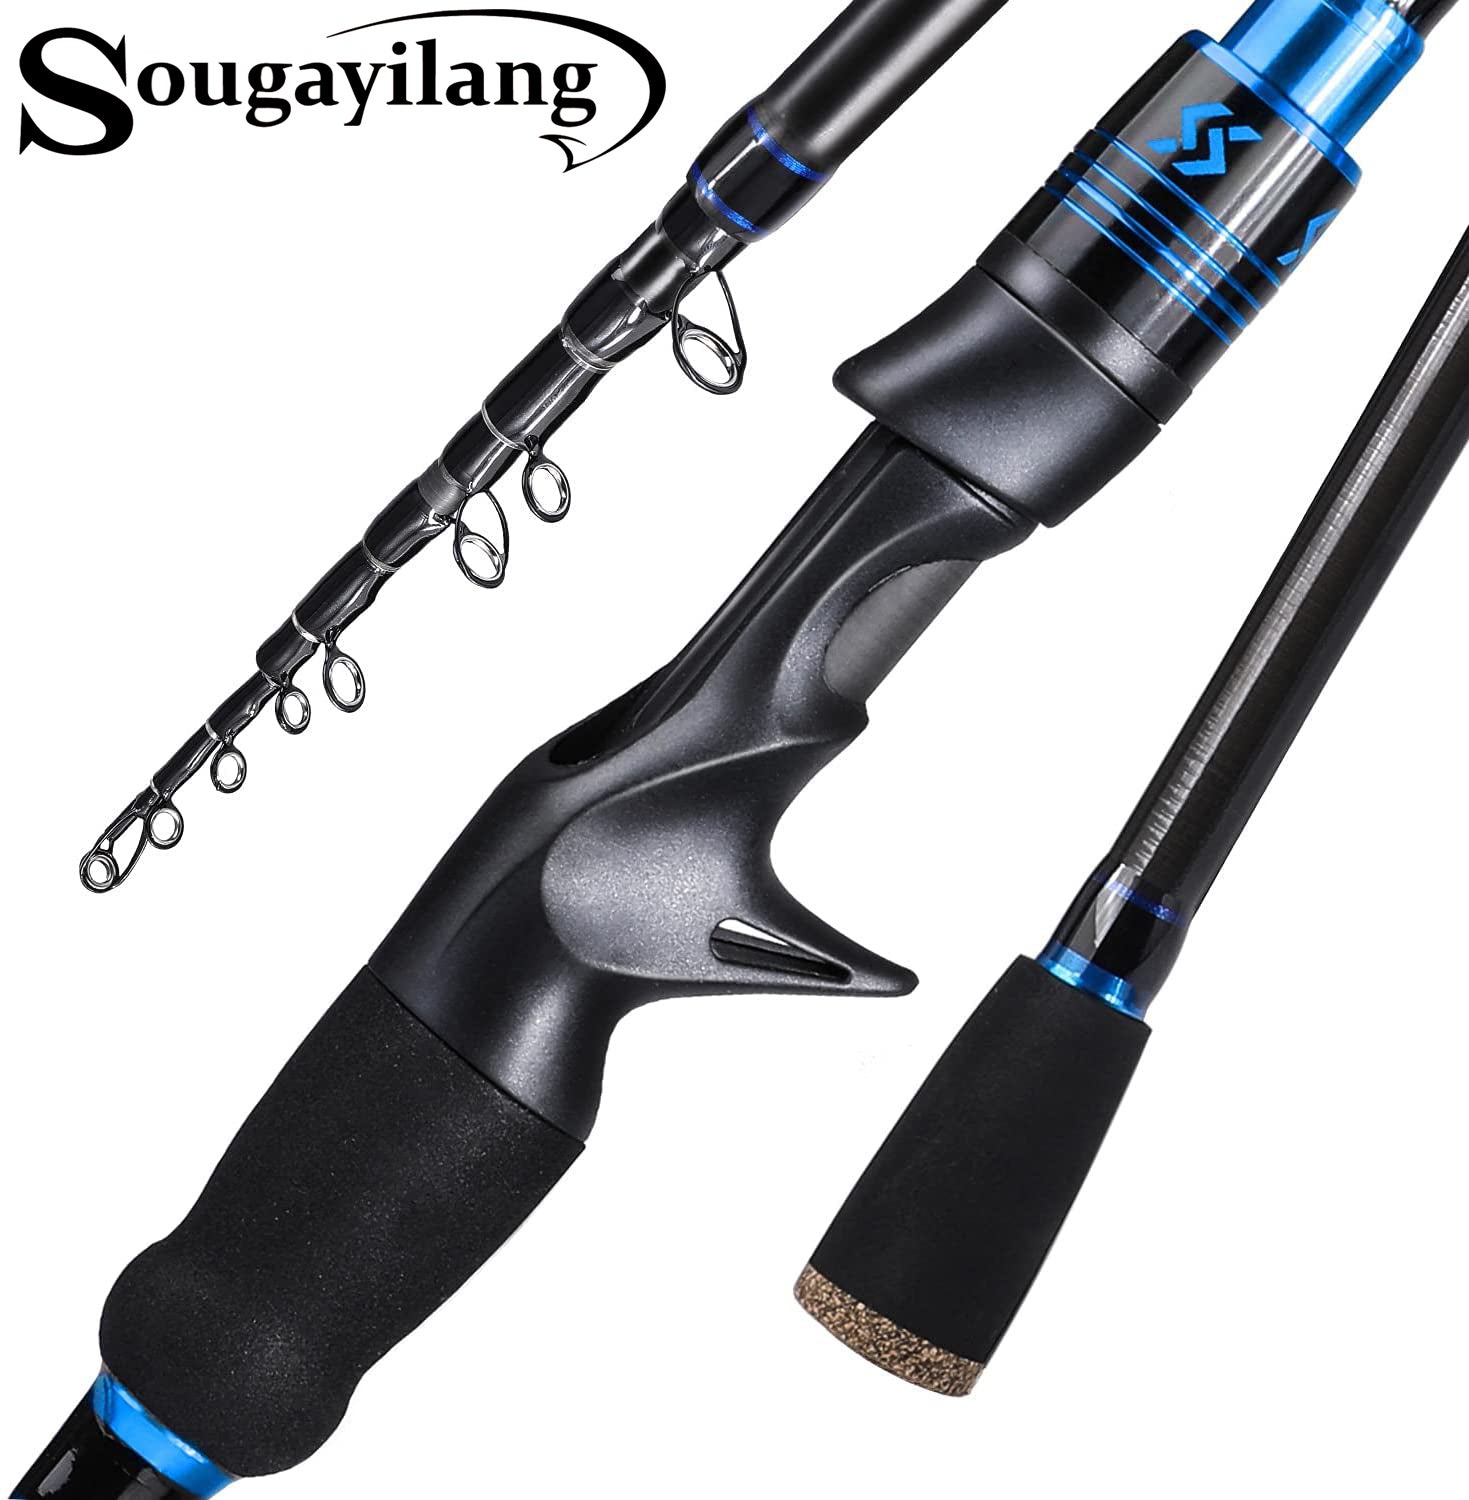 Sougayilang Telescopic Fishing Rod - 24 Ton Carbon Fiber Ultralight Fishing  Pole with CNC Reel Seat, Portable Retractable Handle, Stainless Steel